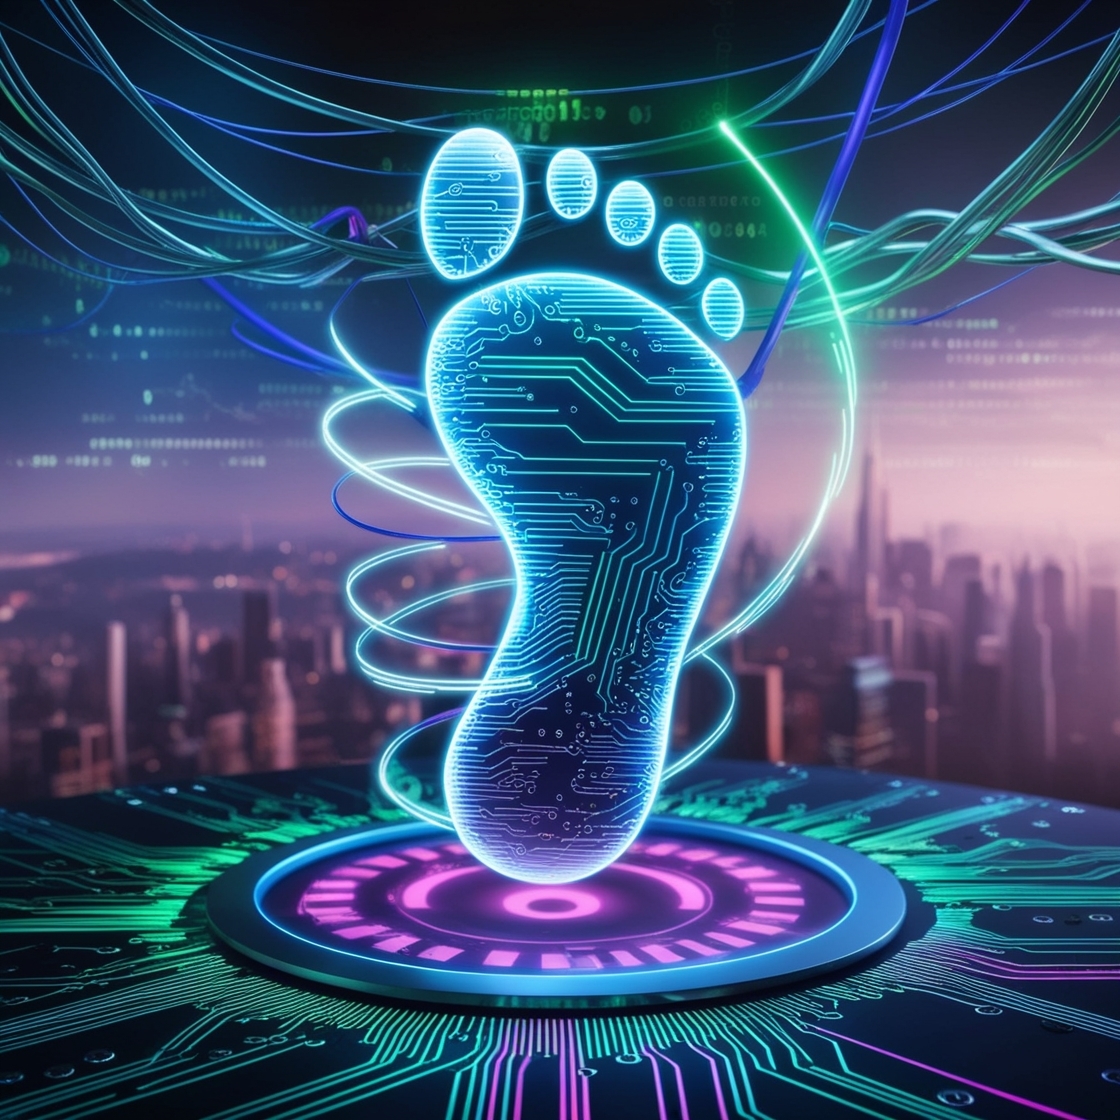 A futuristic digital footprint in the internet, virtual reality, surrounded by glowing circuit boards and neon-lit wires, with a sprawling metropolis cityscape in the background, evoking a sense of limitless connectivity and boundless data streams. The aesthetics are sleek and cyberpunk, with vibrant shades of electric blue, green, and purple dominating the palette, as lines of code and 1s and 0s swirl around the footprint, imbuing it with an otherworldly energy, while faint LED lights flicker and pulse like a living, breathing entity.